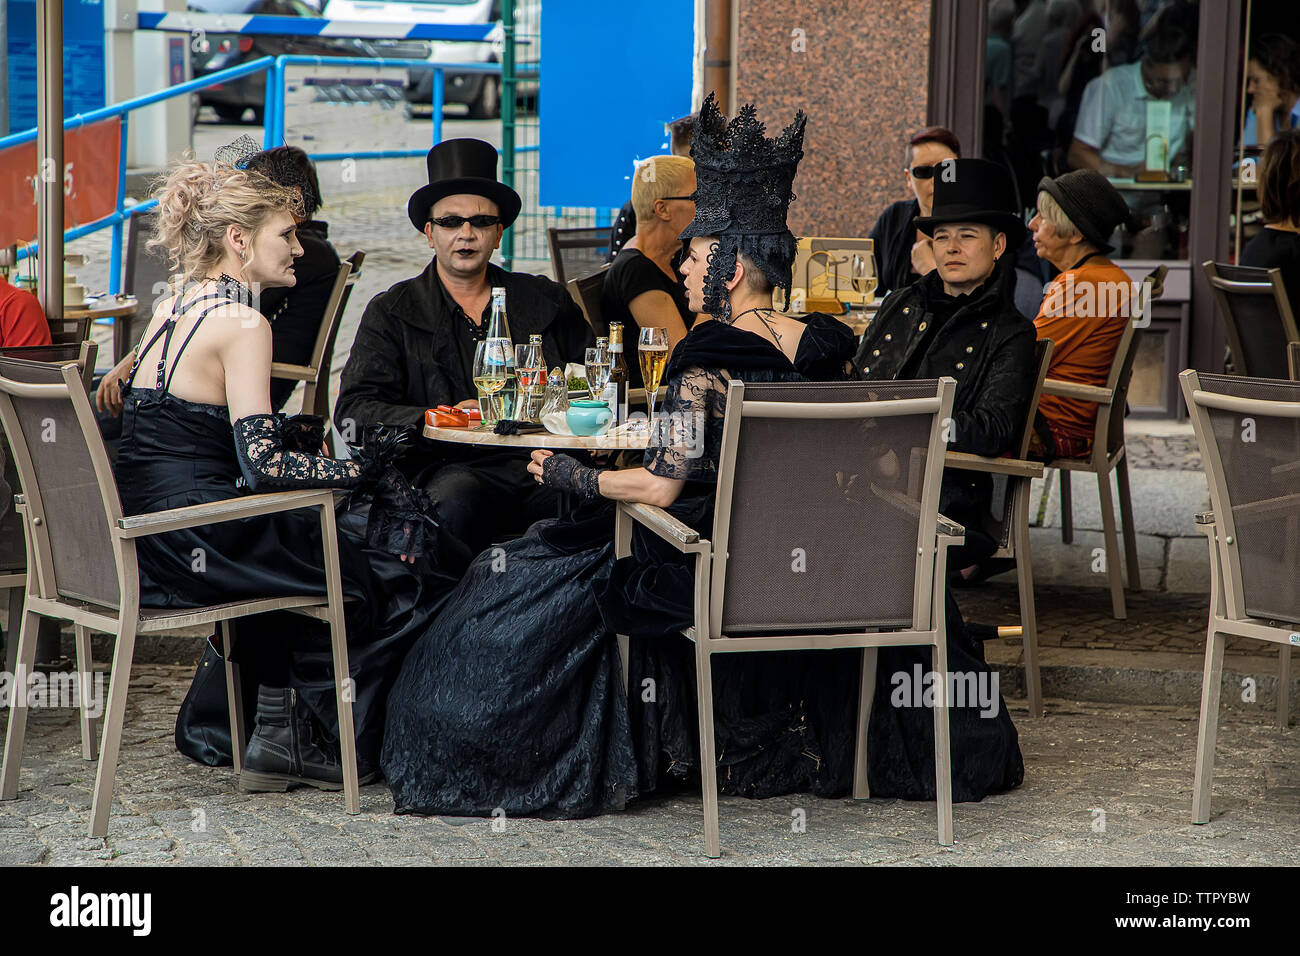 Leipzig, Germany , Juny 9, 2019 . Festive people in black and red gothic  and steampunk costumes at the street Stock Photo